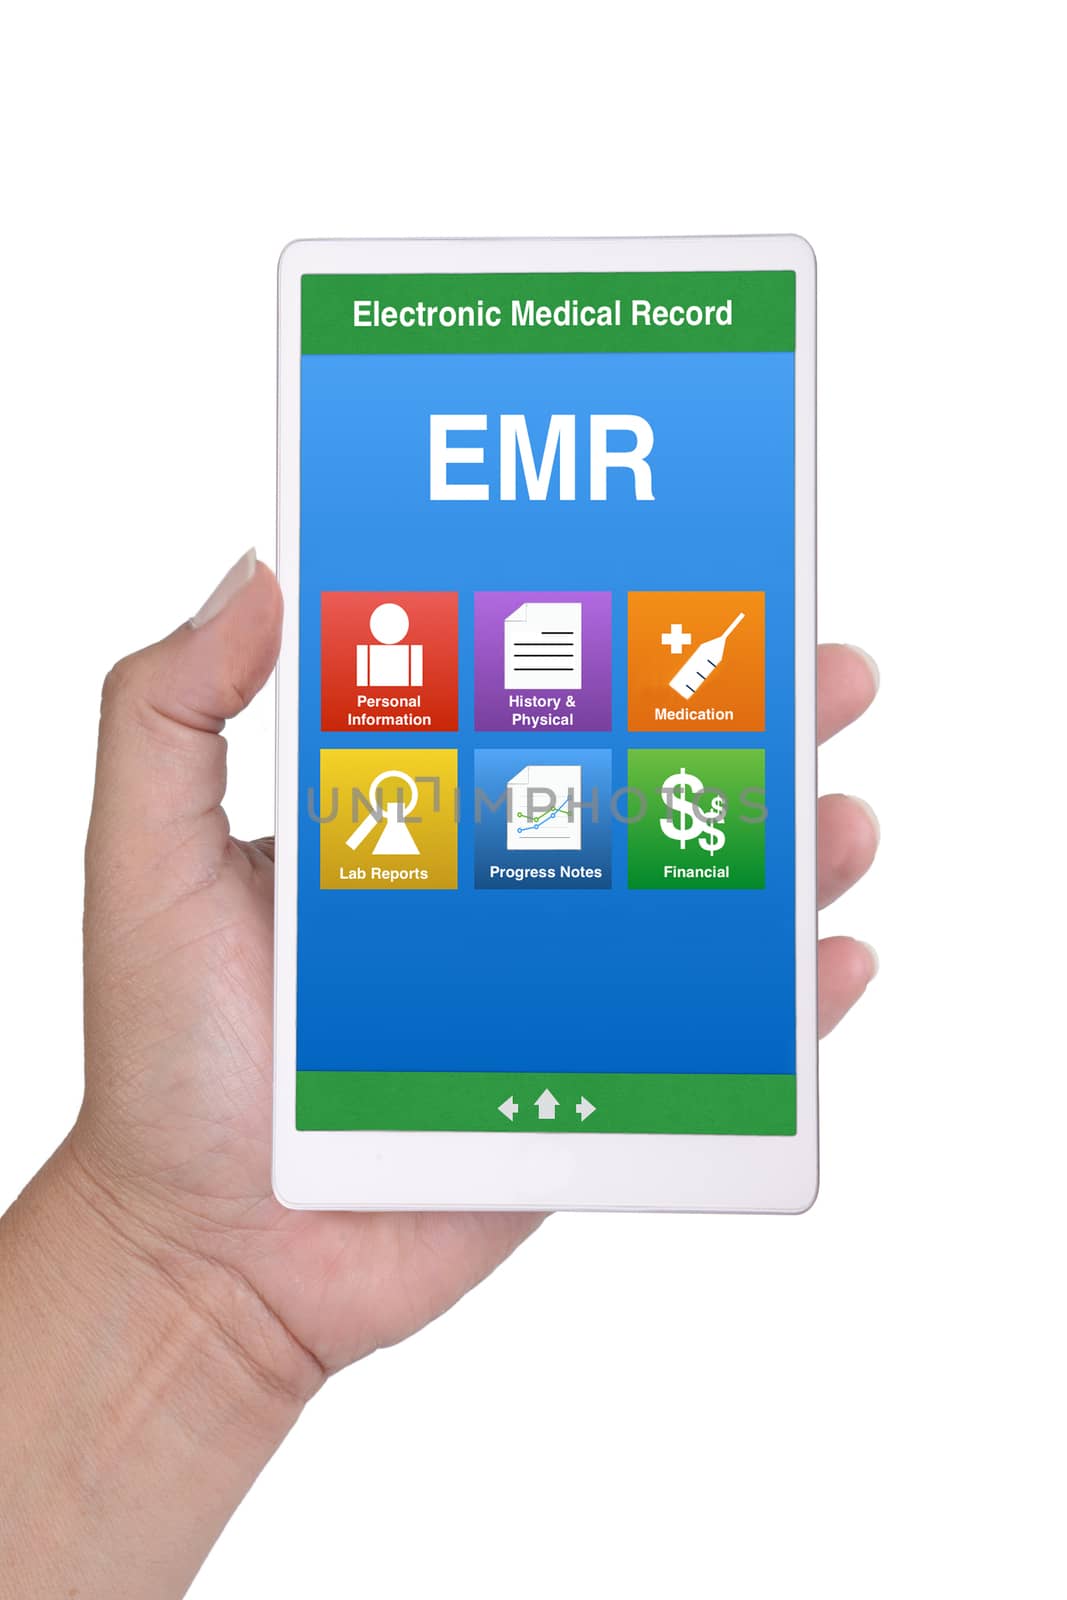 Hand holding smartphone showing electronic medical record menu on screen on white background.